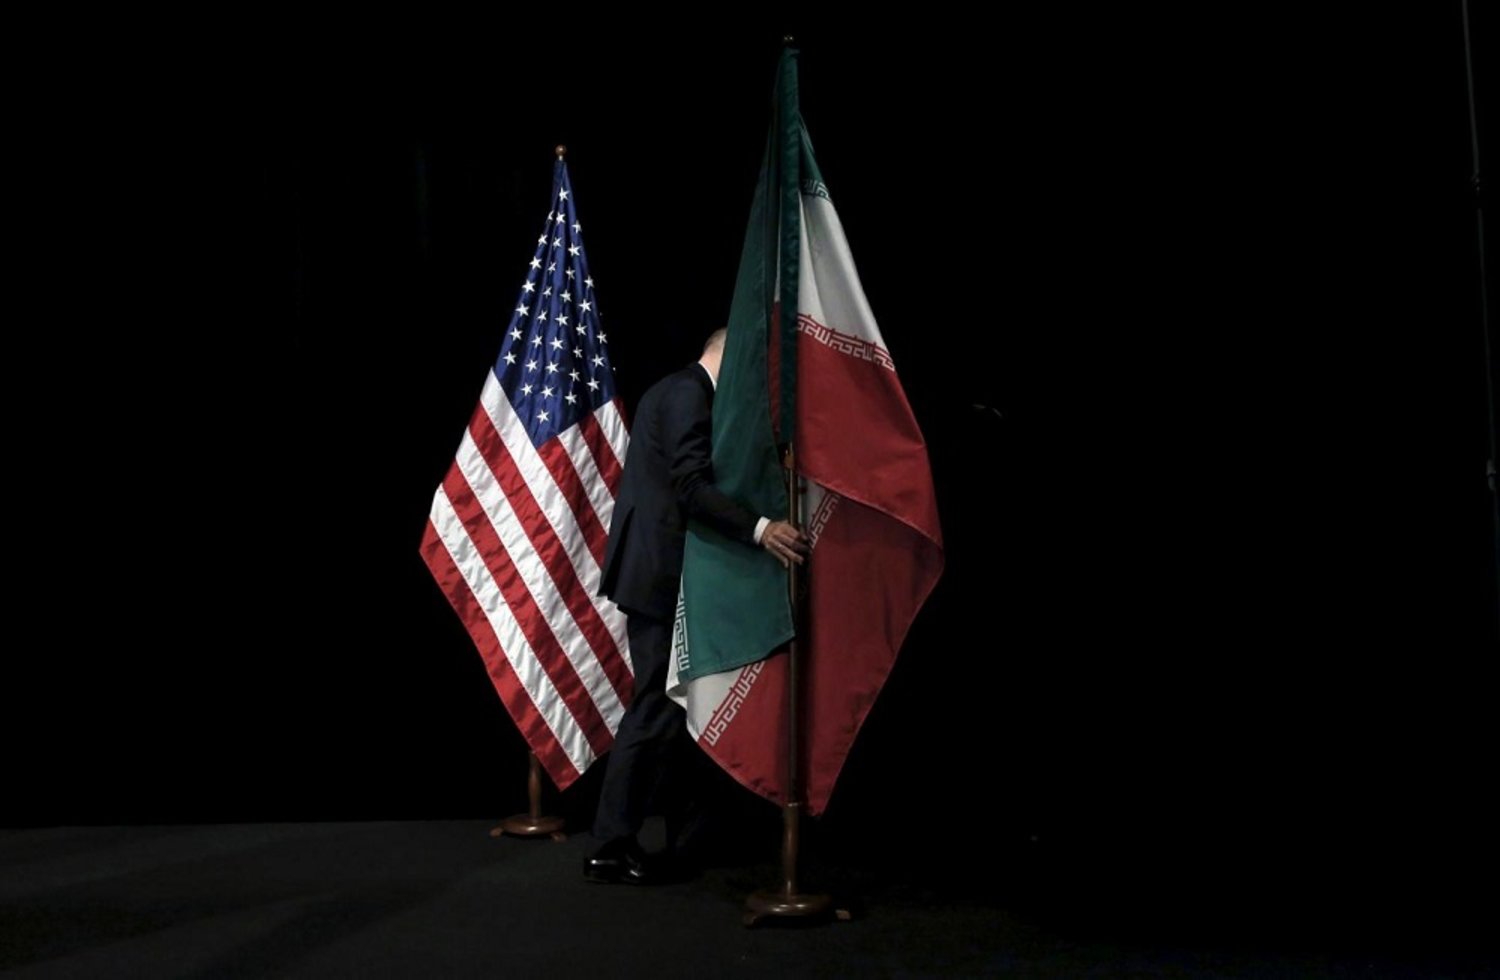 A staff member removes the Iranian flag from the stage after a group picture with officials during the Iran nuclear talks in Vienna, Austria in July 2015. (Reuters)